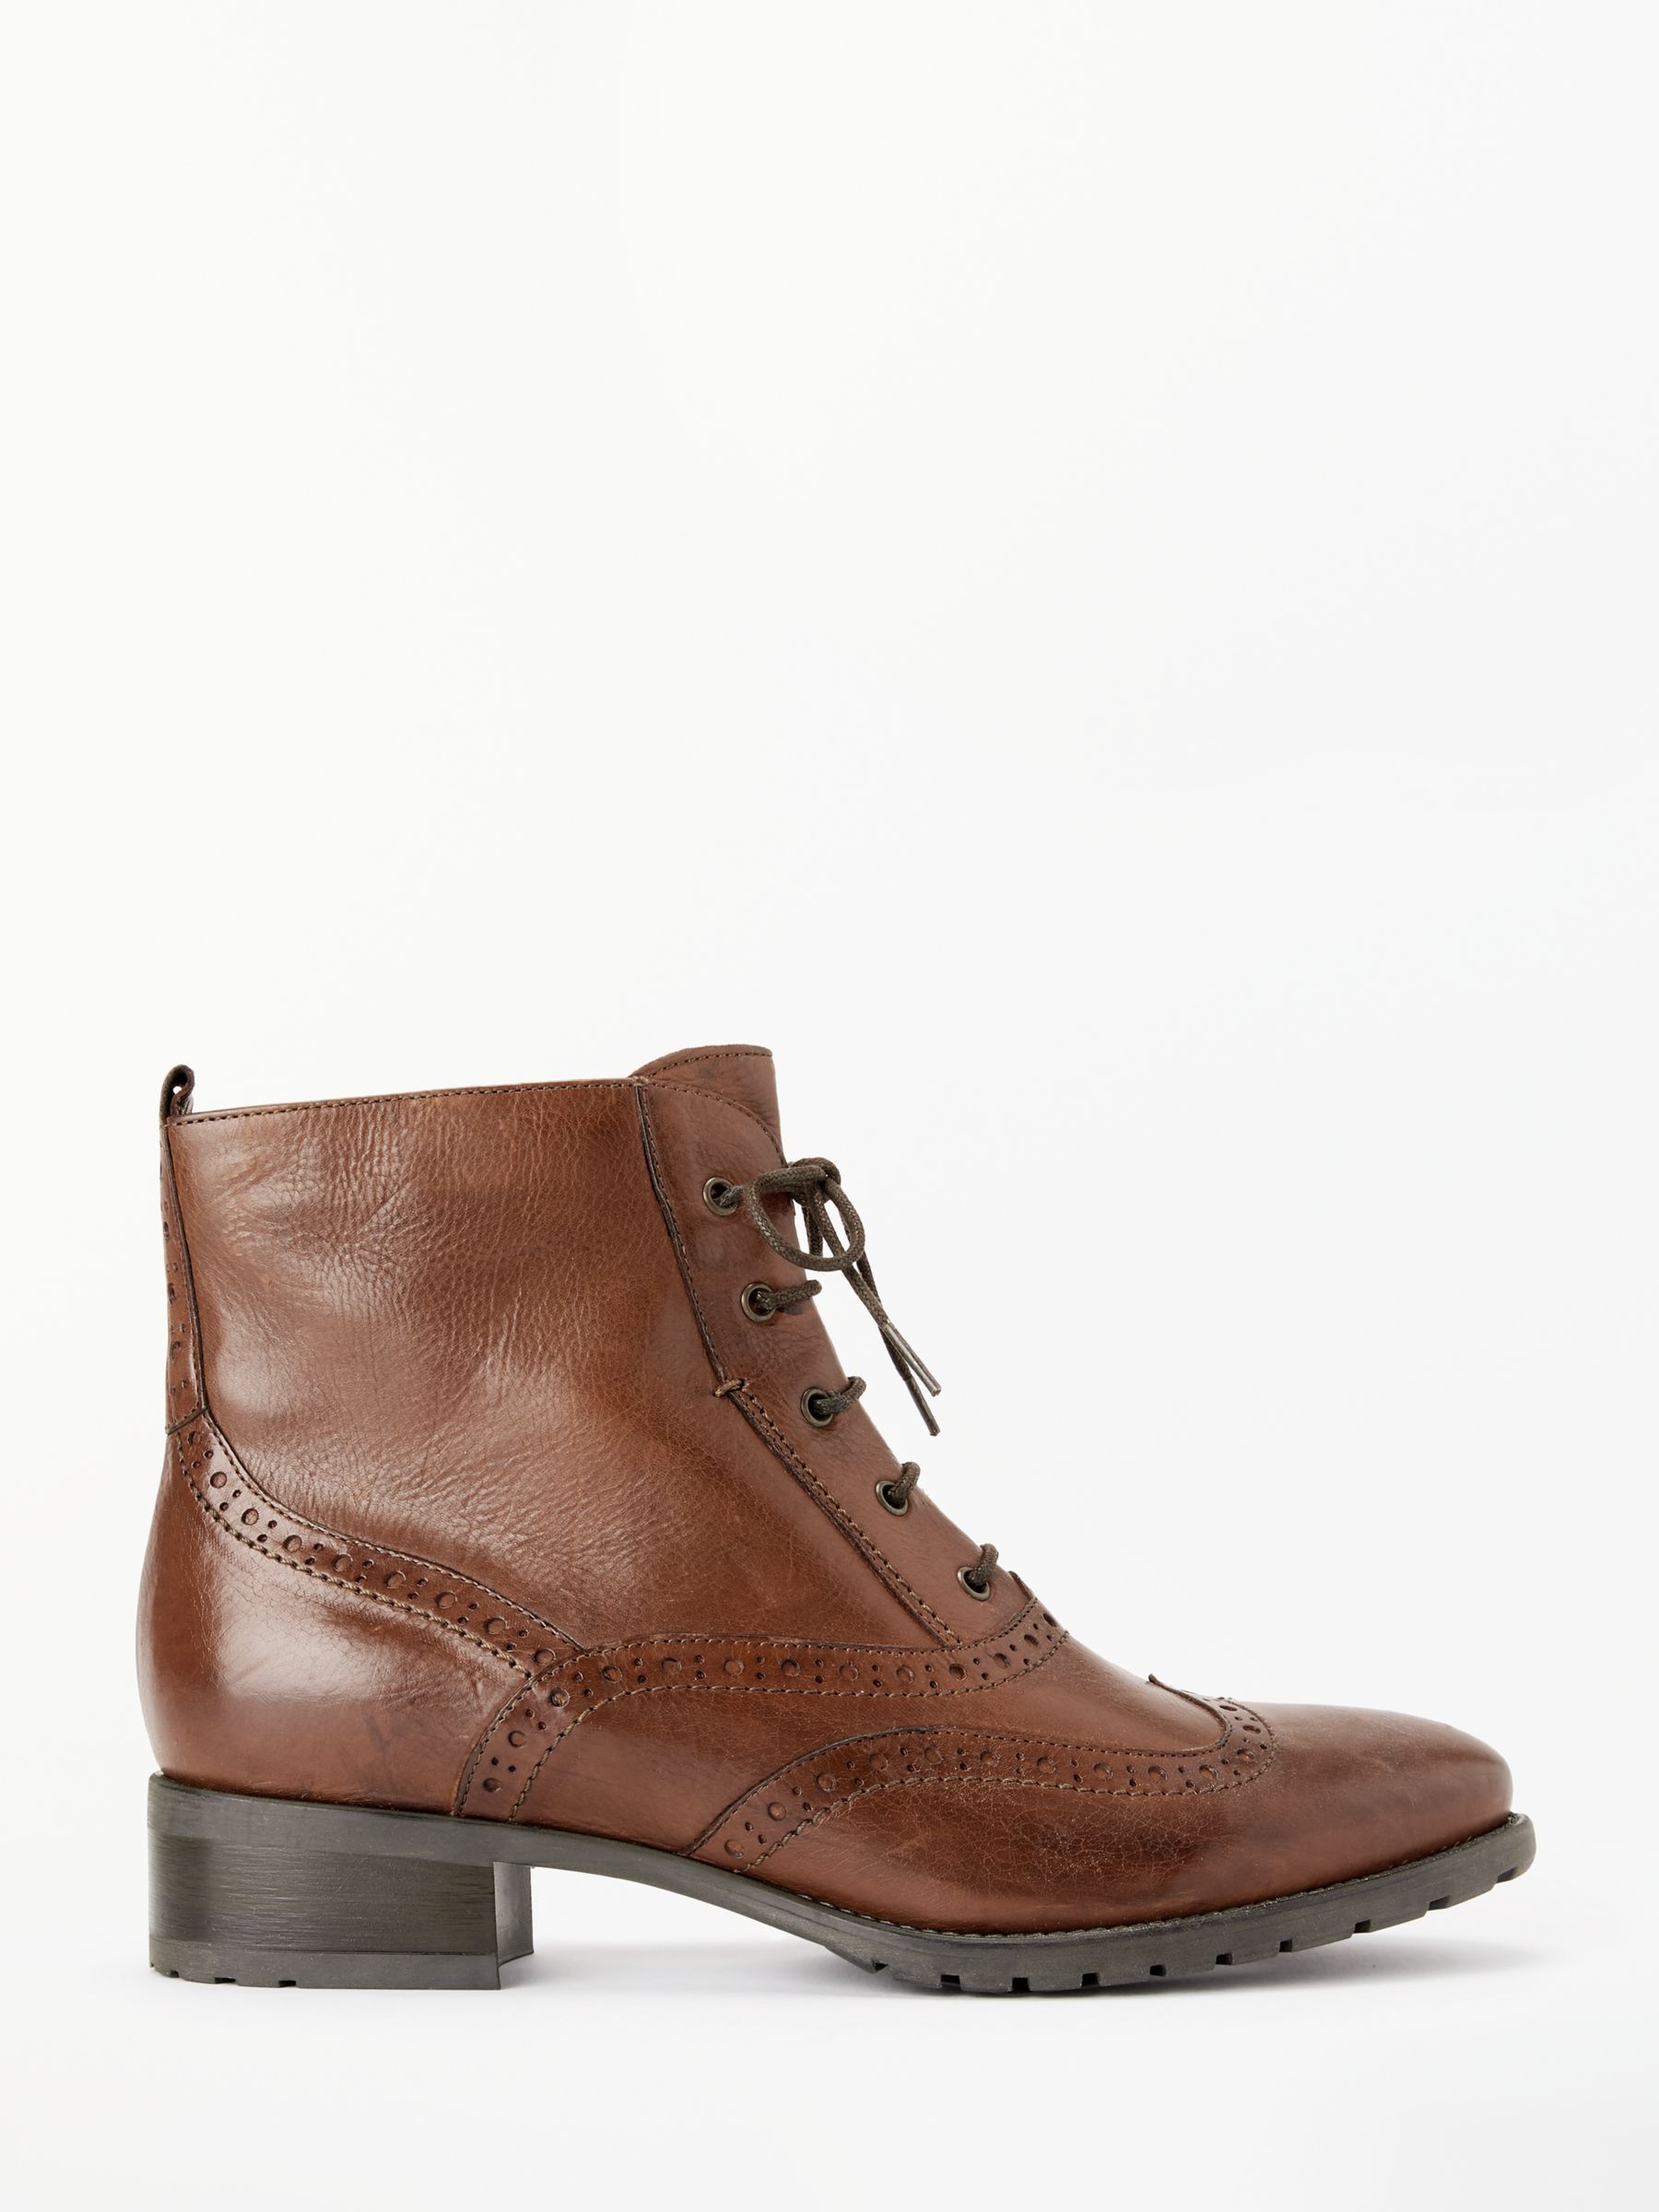 women's lace up ankle boots leather